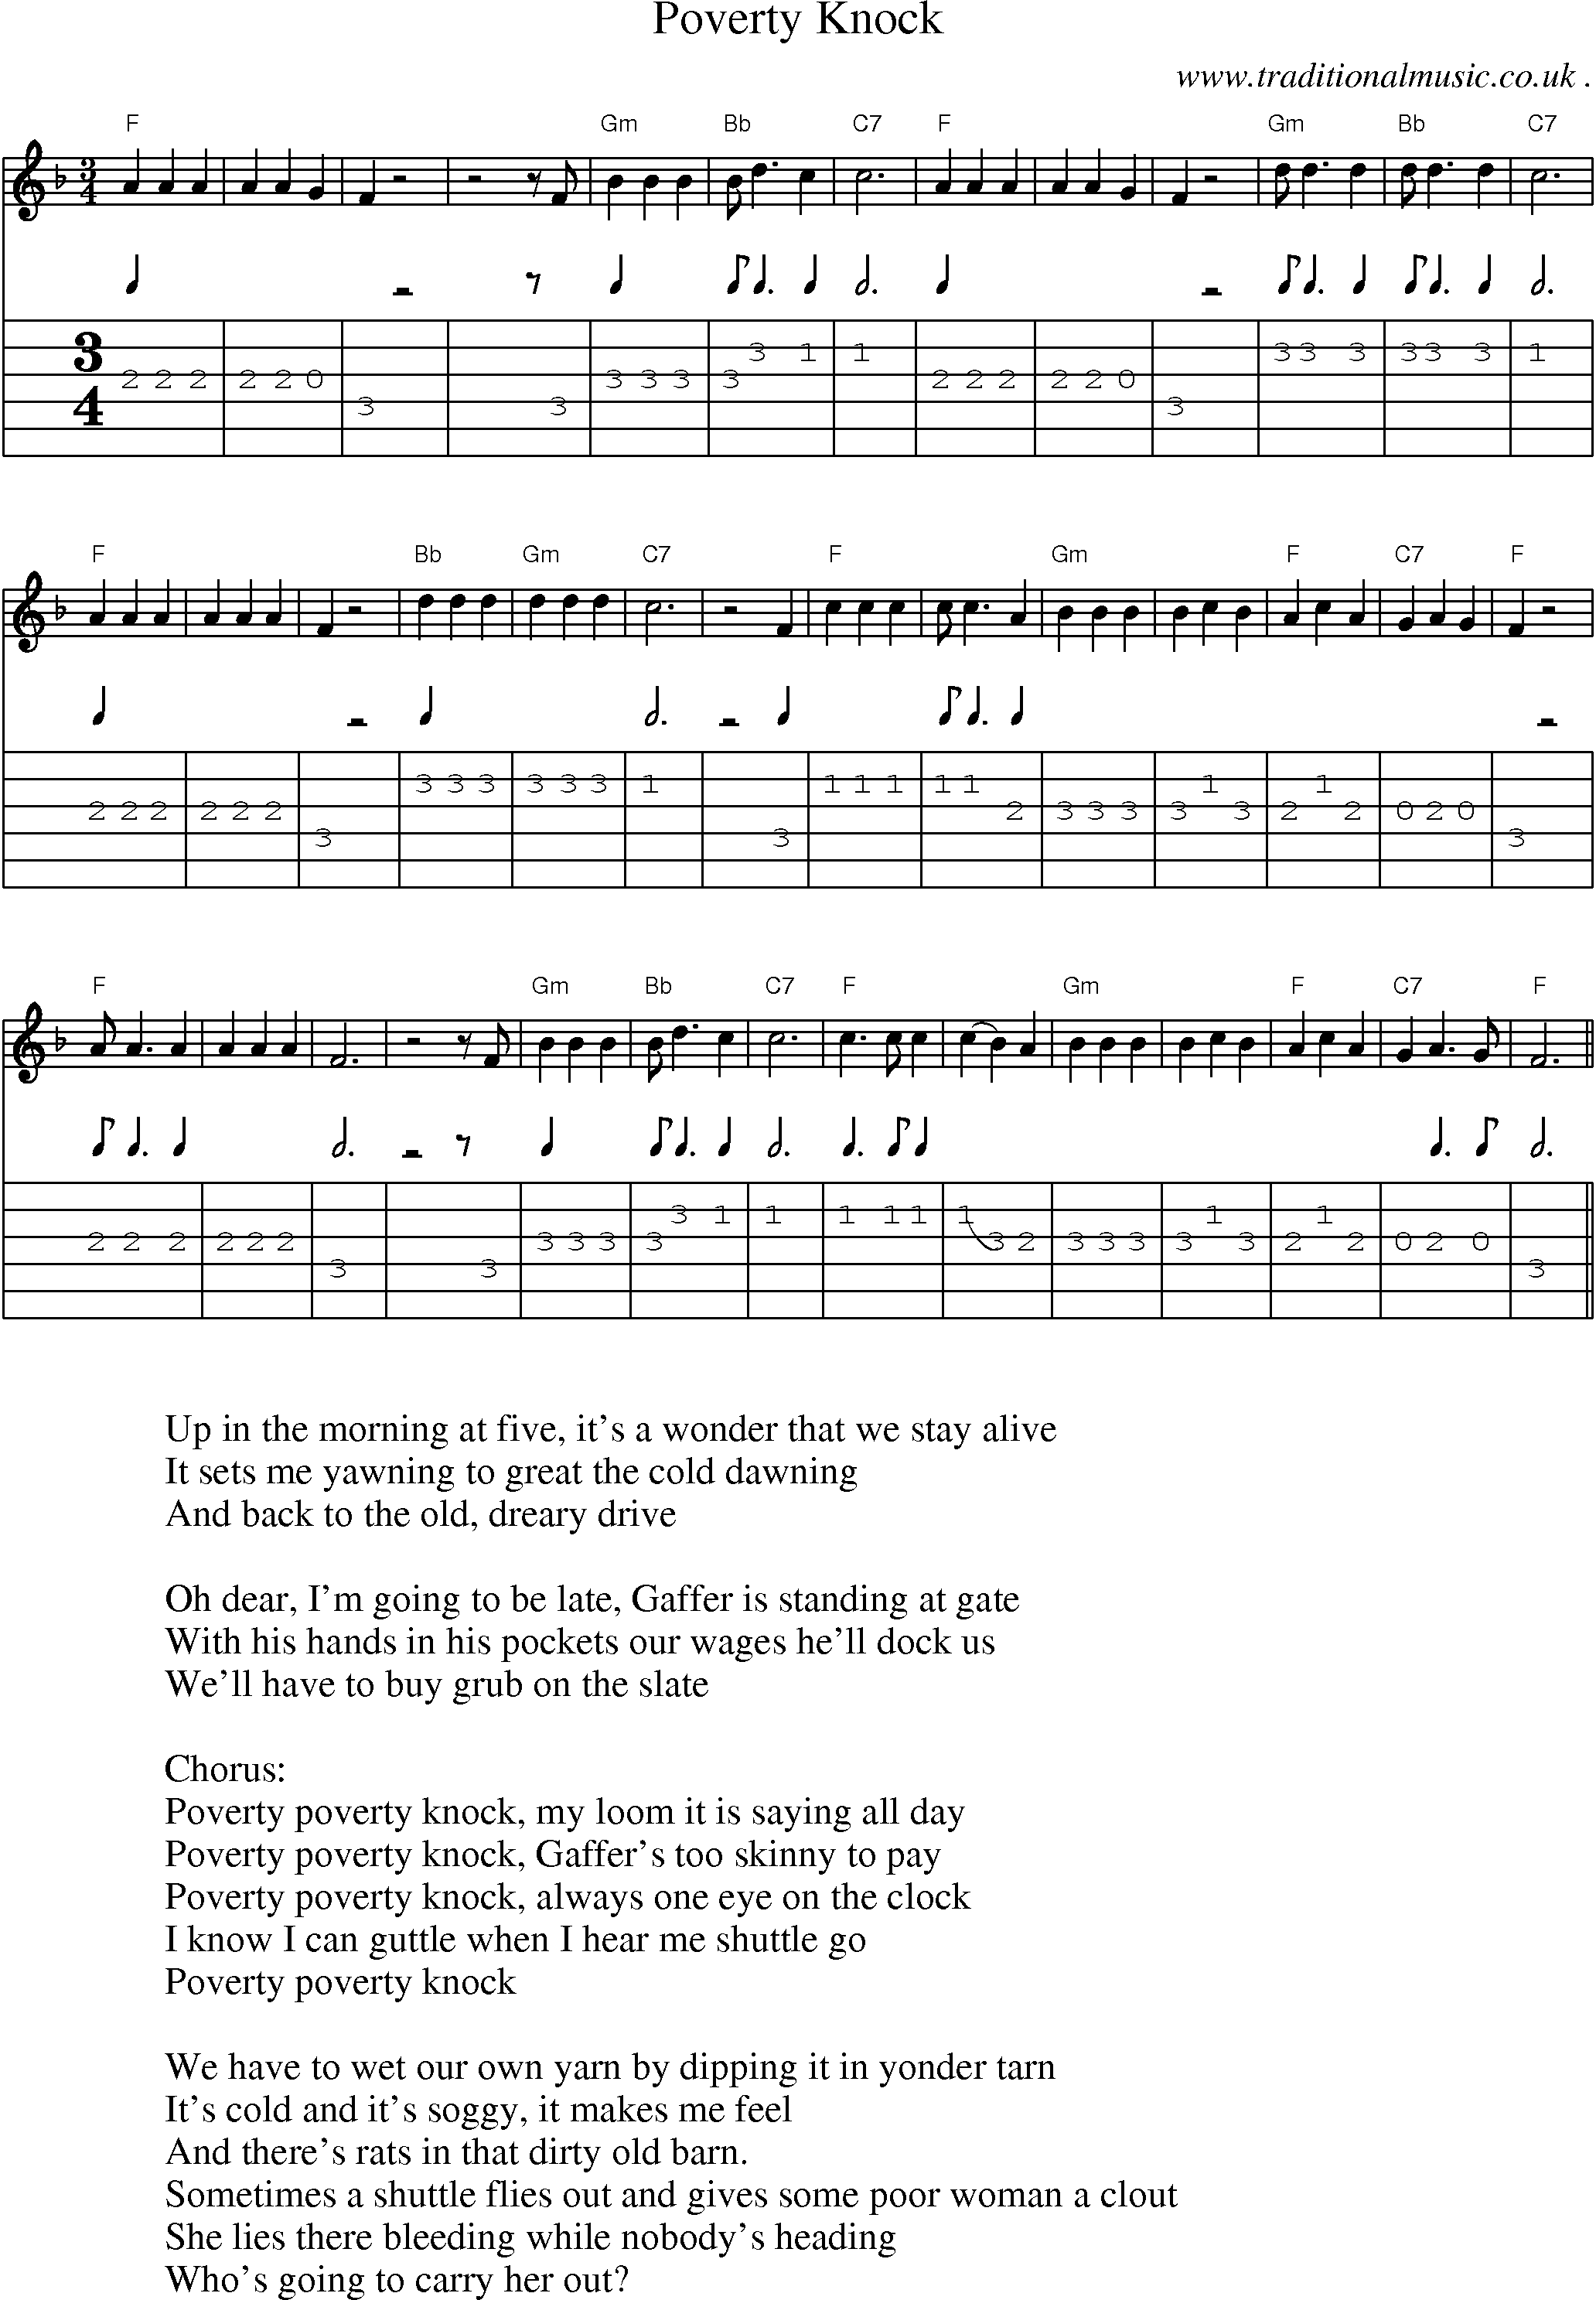 Sheet-Music and Guitar Tabs for Poverty Knock